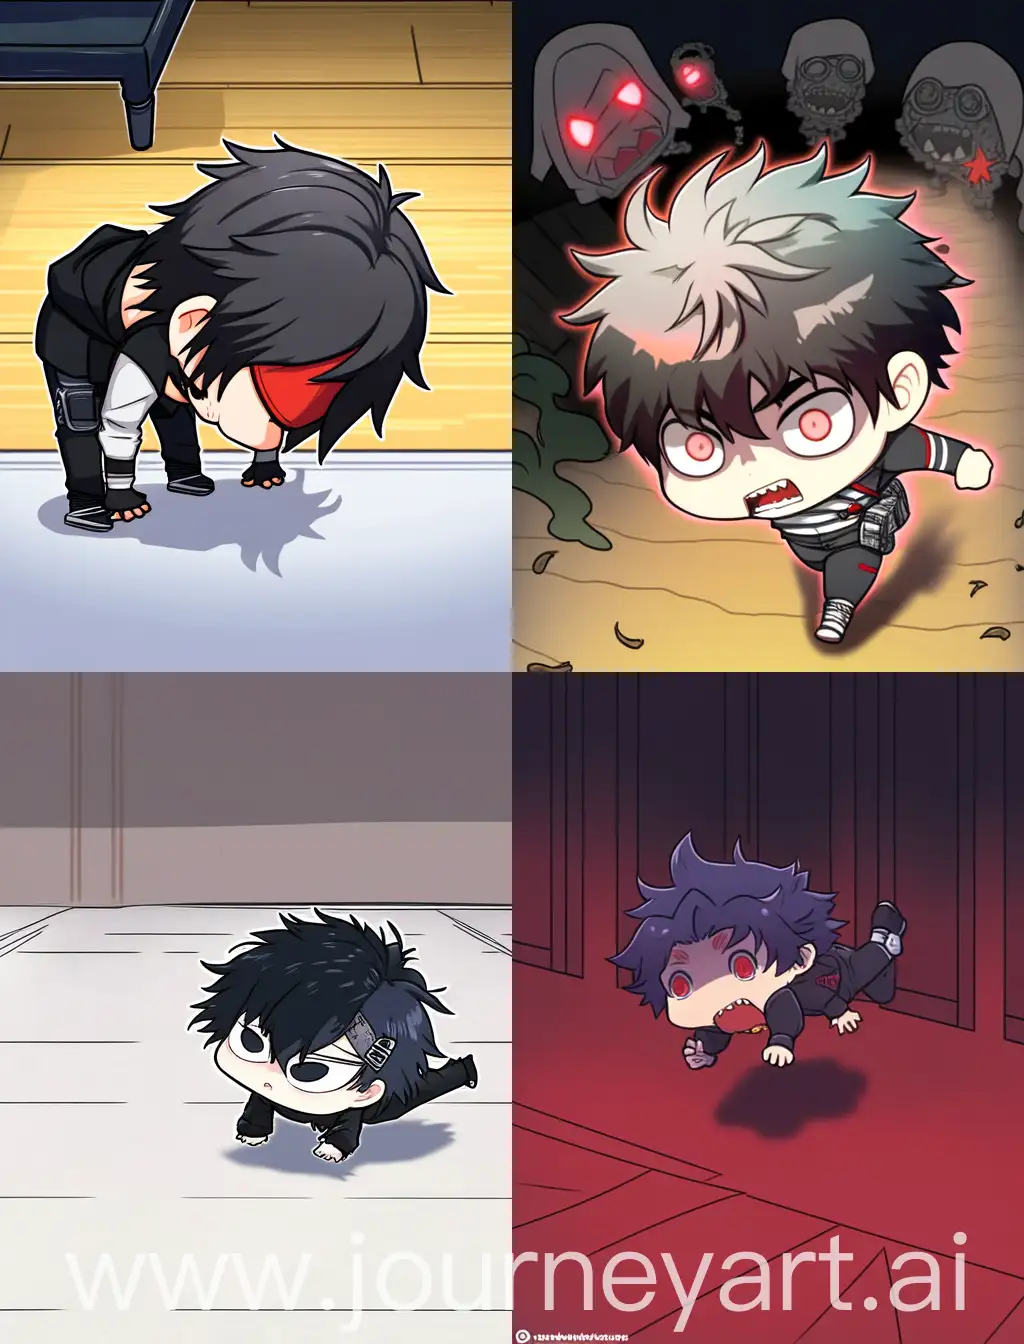 chibi anime emo guy doing push up, with spooky background